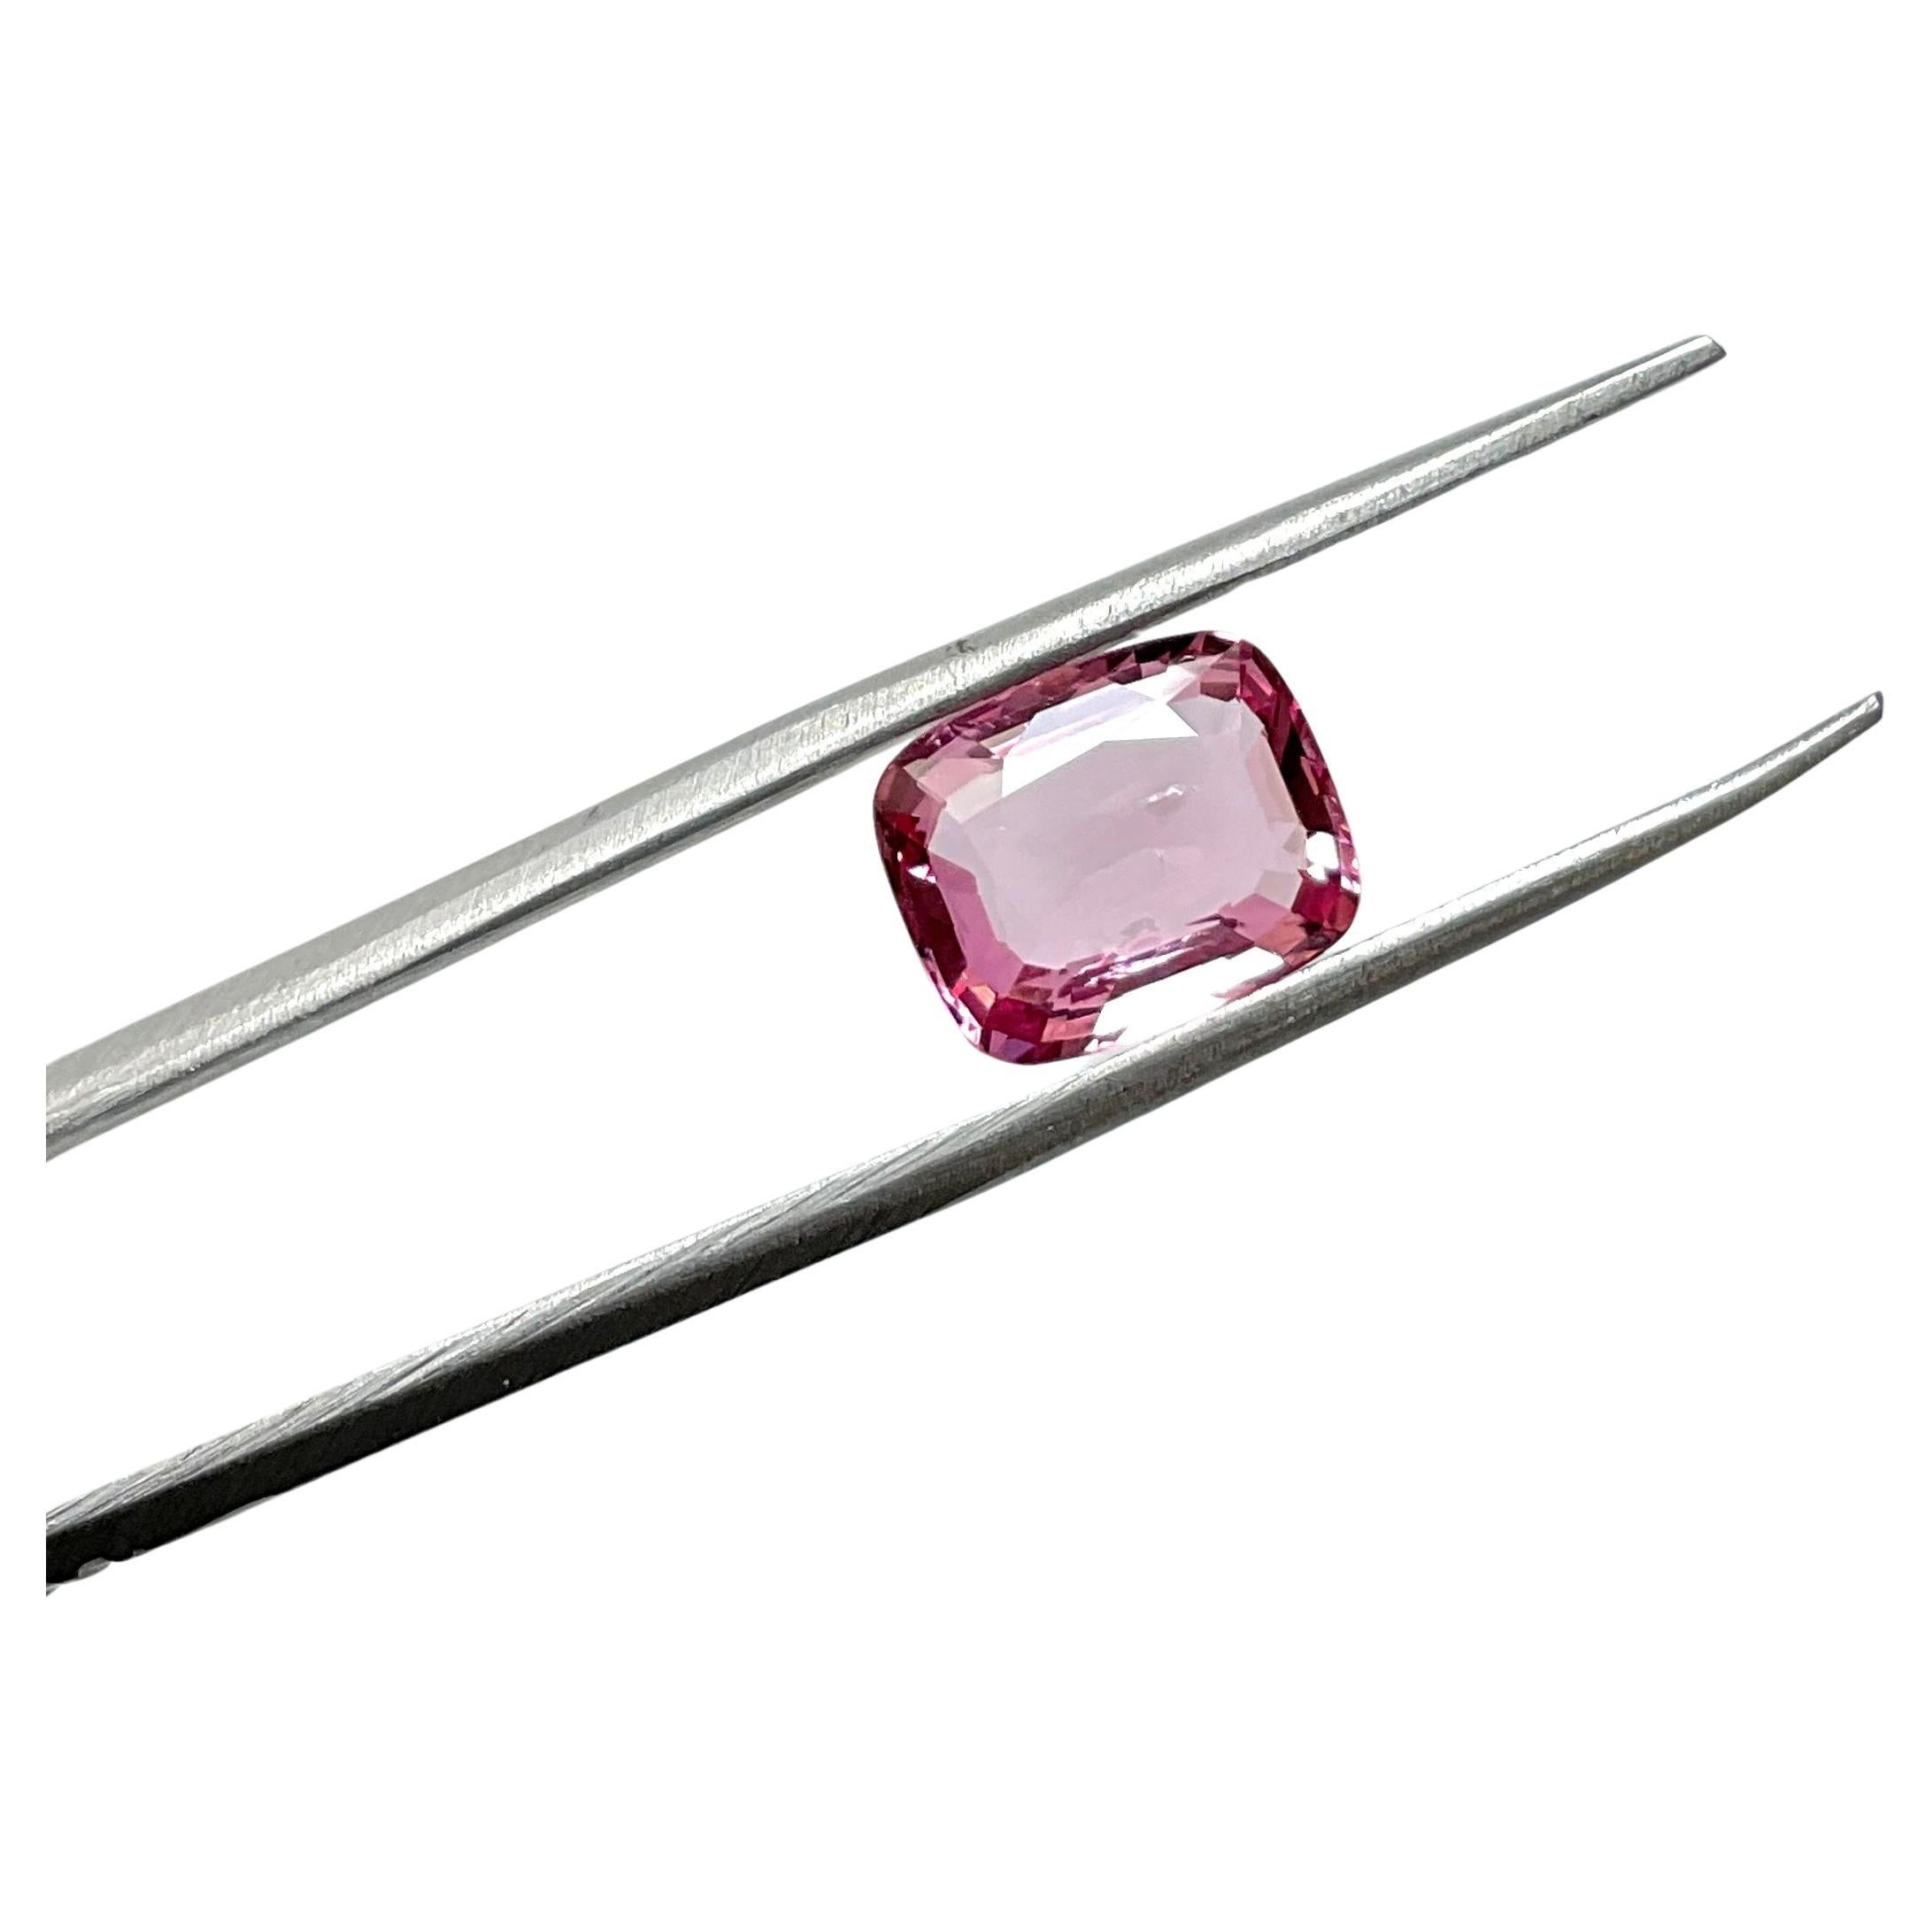 3.24 Carat spinel cushion cut stone for jewelry natural gemstone top quality For Sale